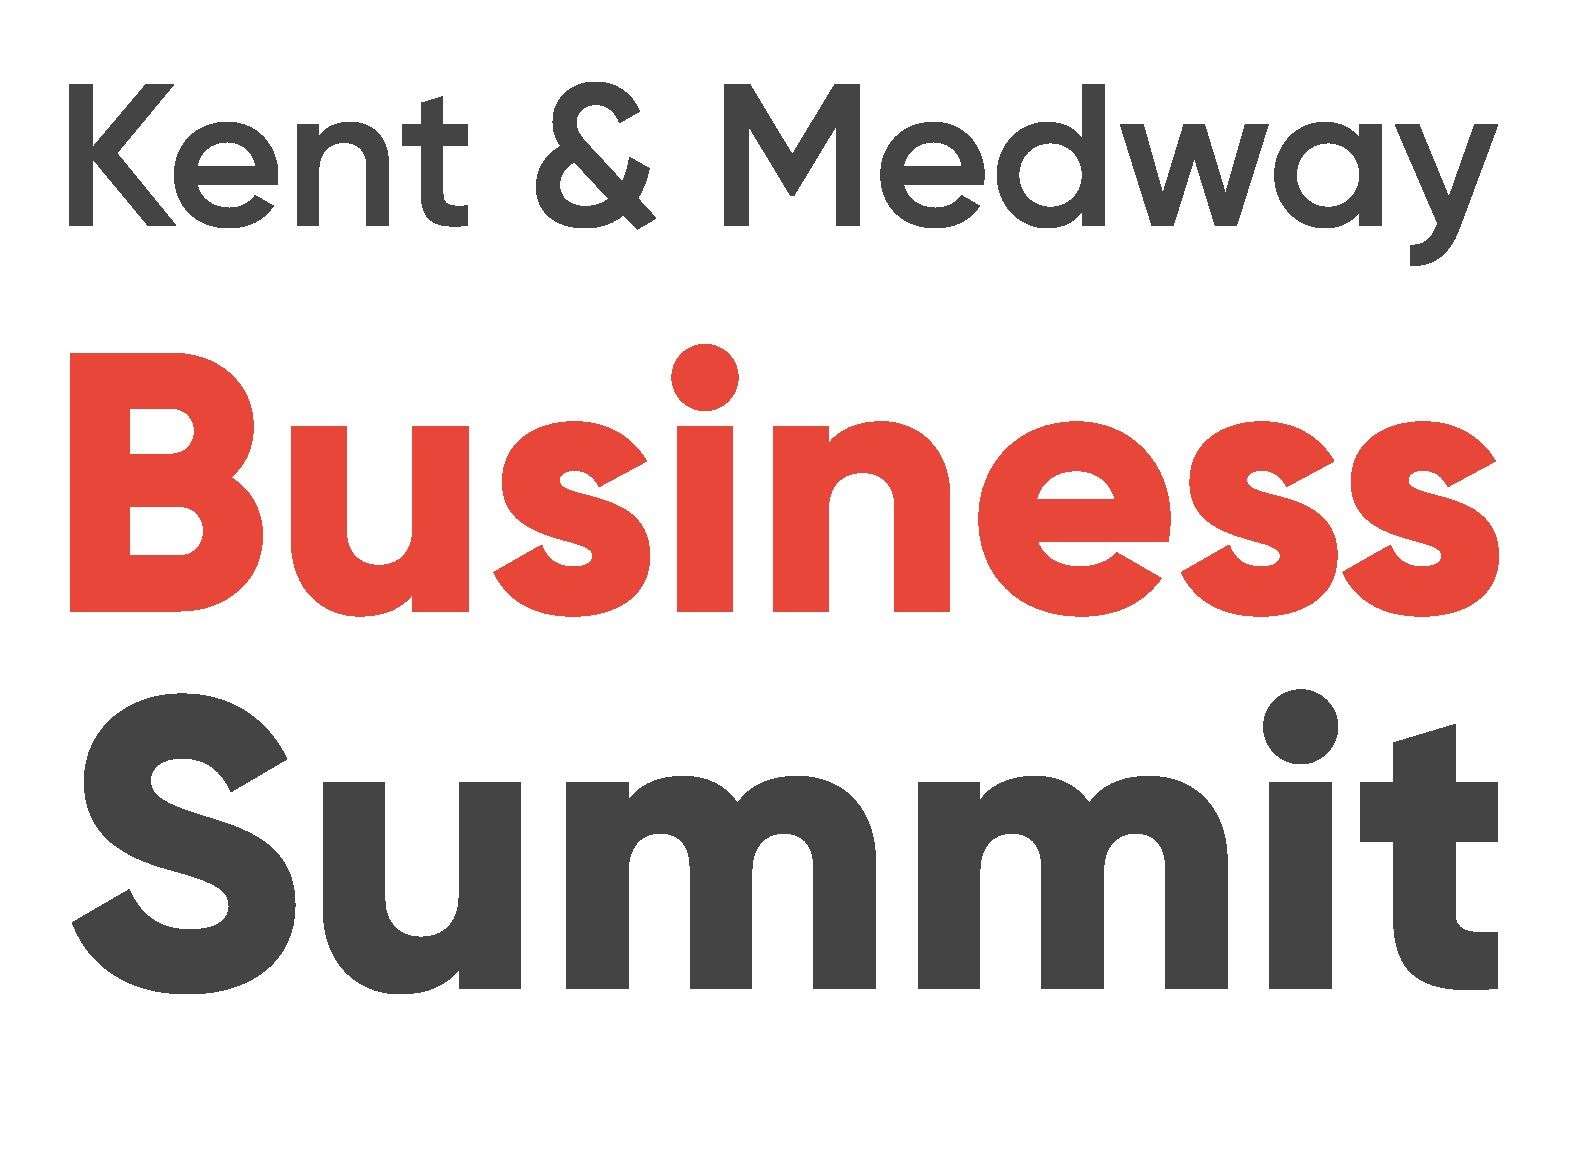 Kent and Medway Business Summit takes place on Friday, January 15